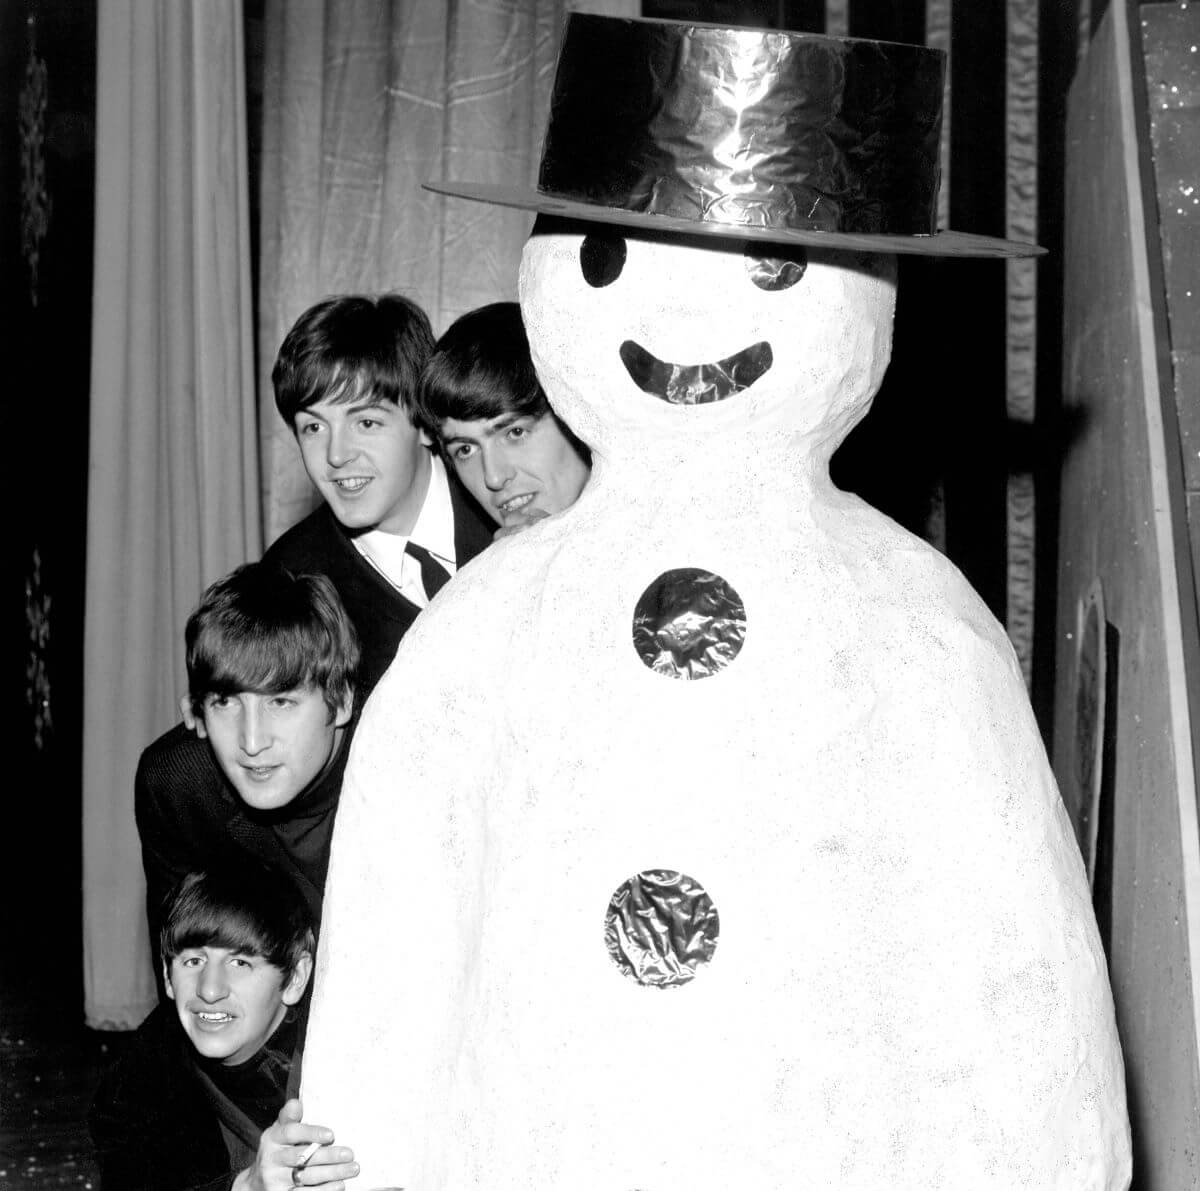 A black and white picture of The Beatles peeking out from the side of a large snowman statue.